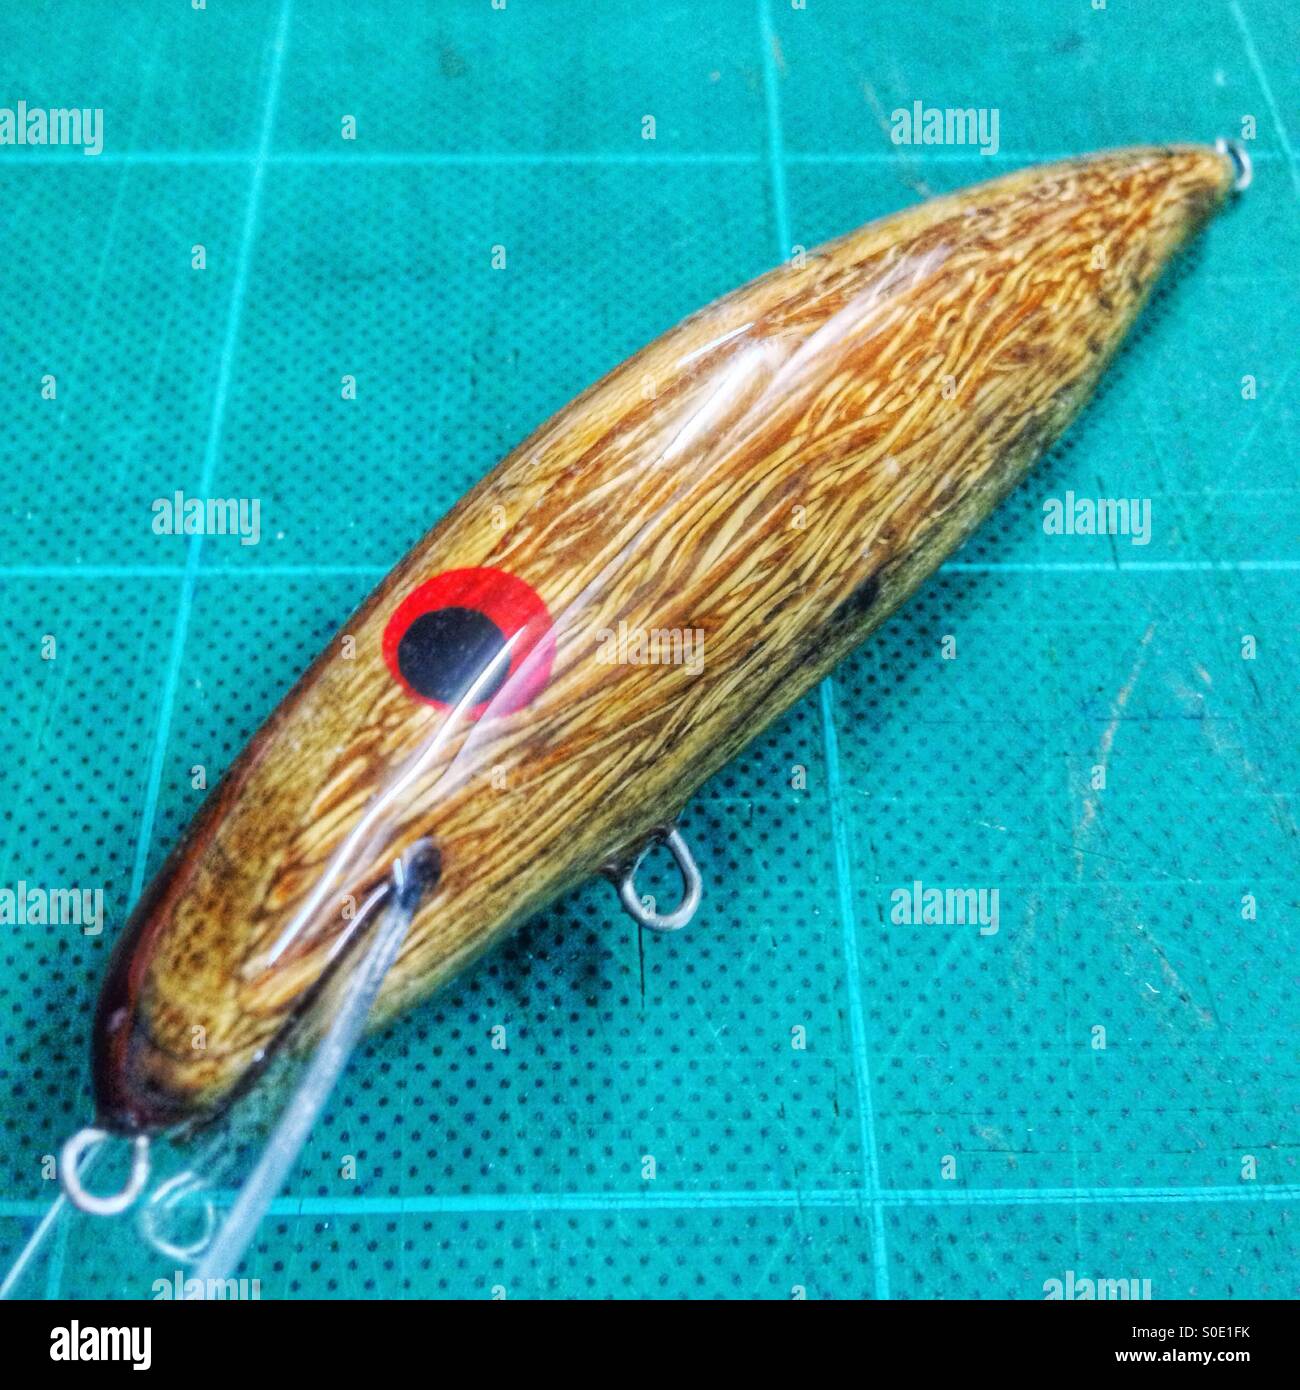 https://c8.alamy.com/comp/S0E1FK/handmade-fishing-lure-carved-from-a-coconut-in-darwin-northern-territory-S0E1FK.jpg